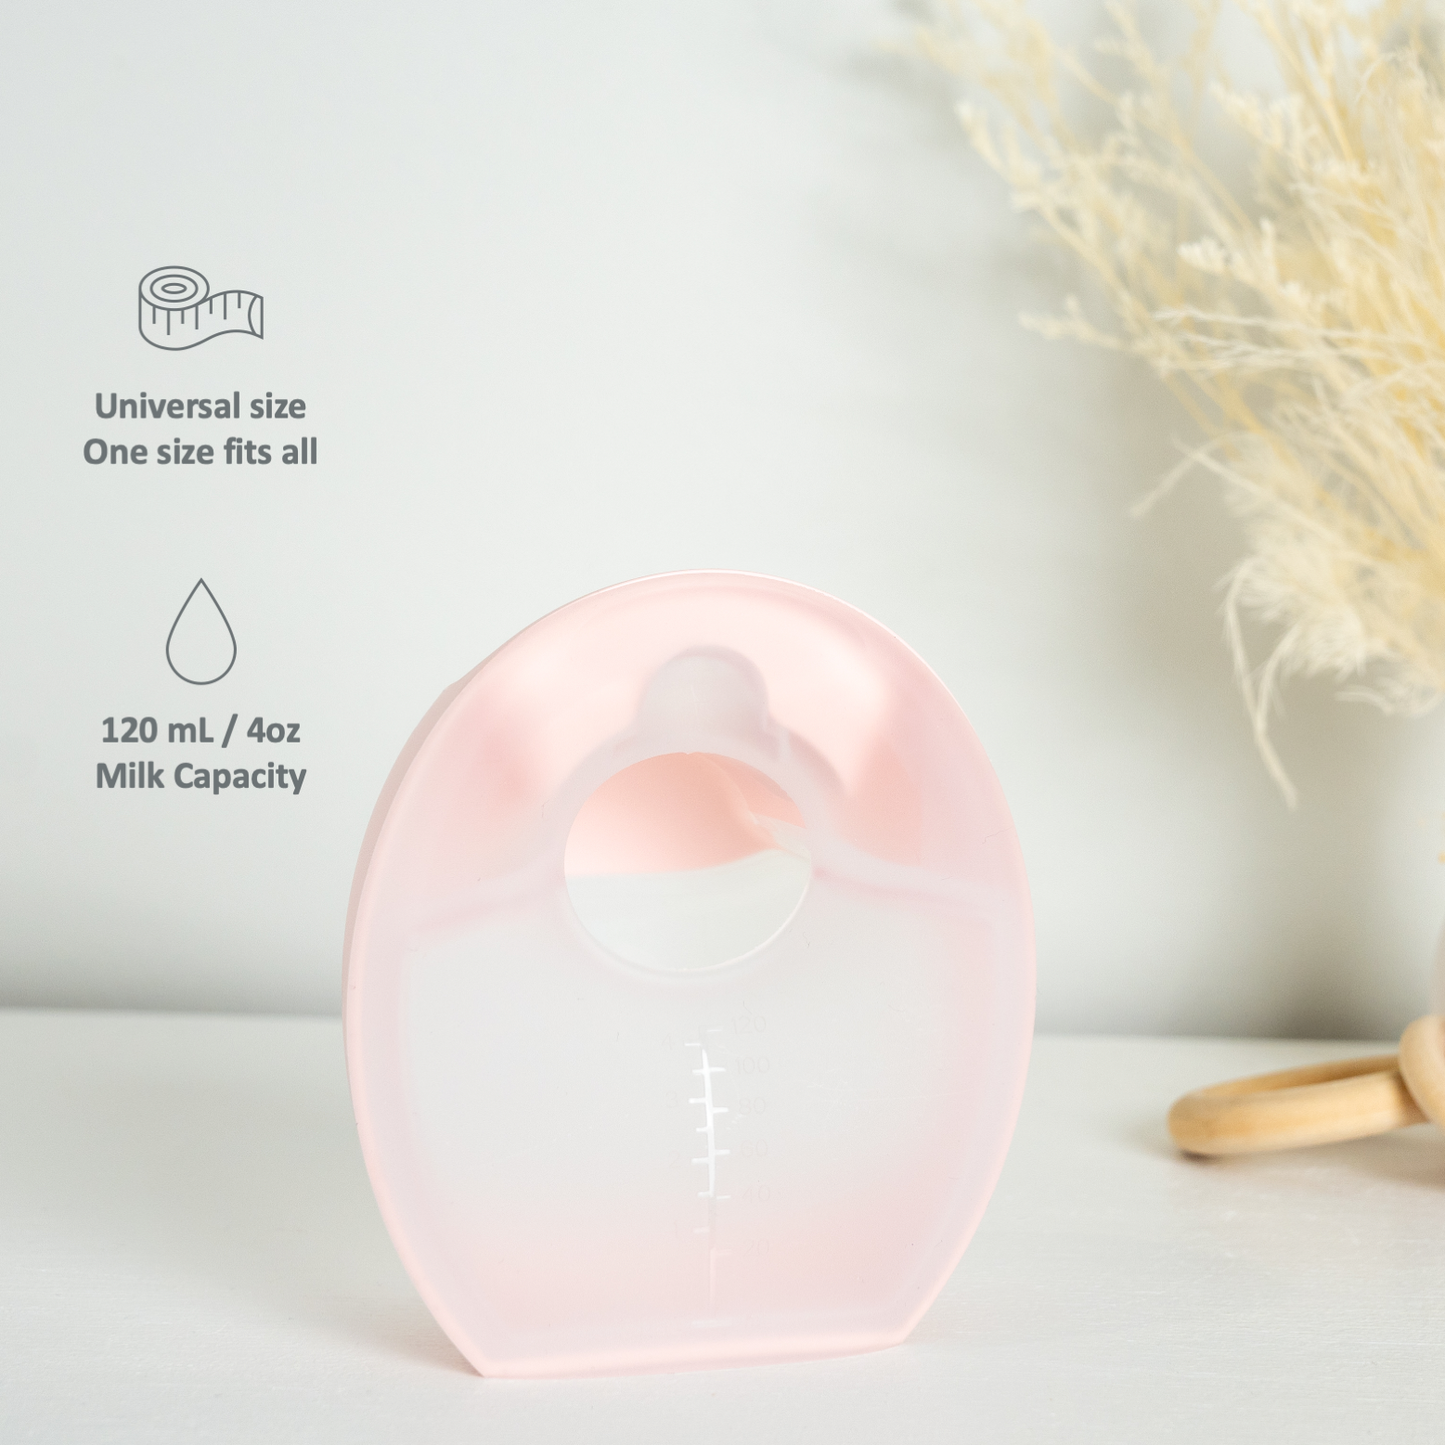 Jellie Collect Wearable Breast Pump Pink